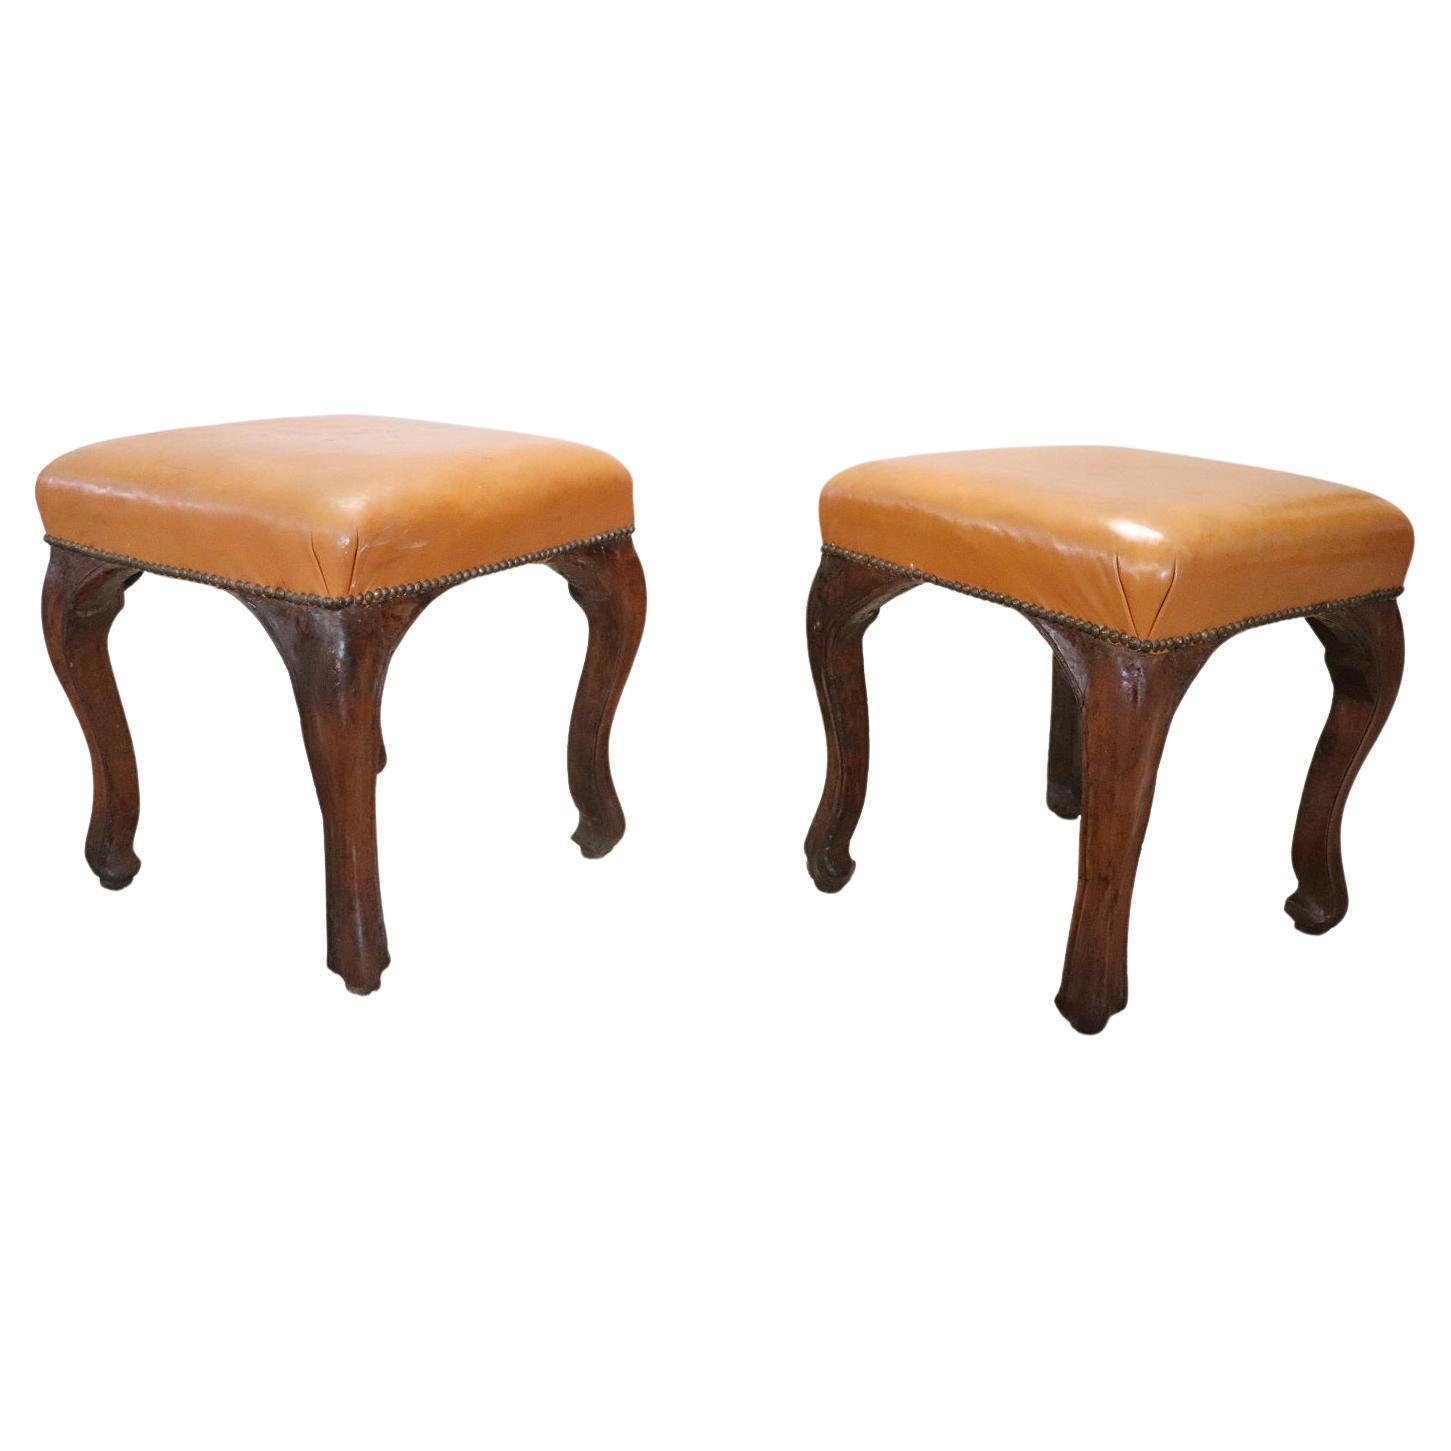 18th Century Walnut and Leather Pair of Antique Stools For Sale